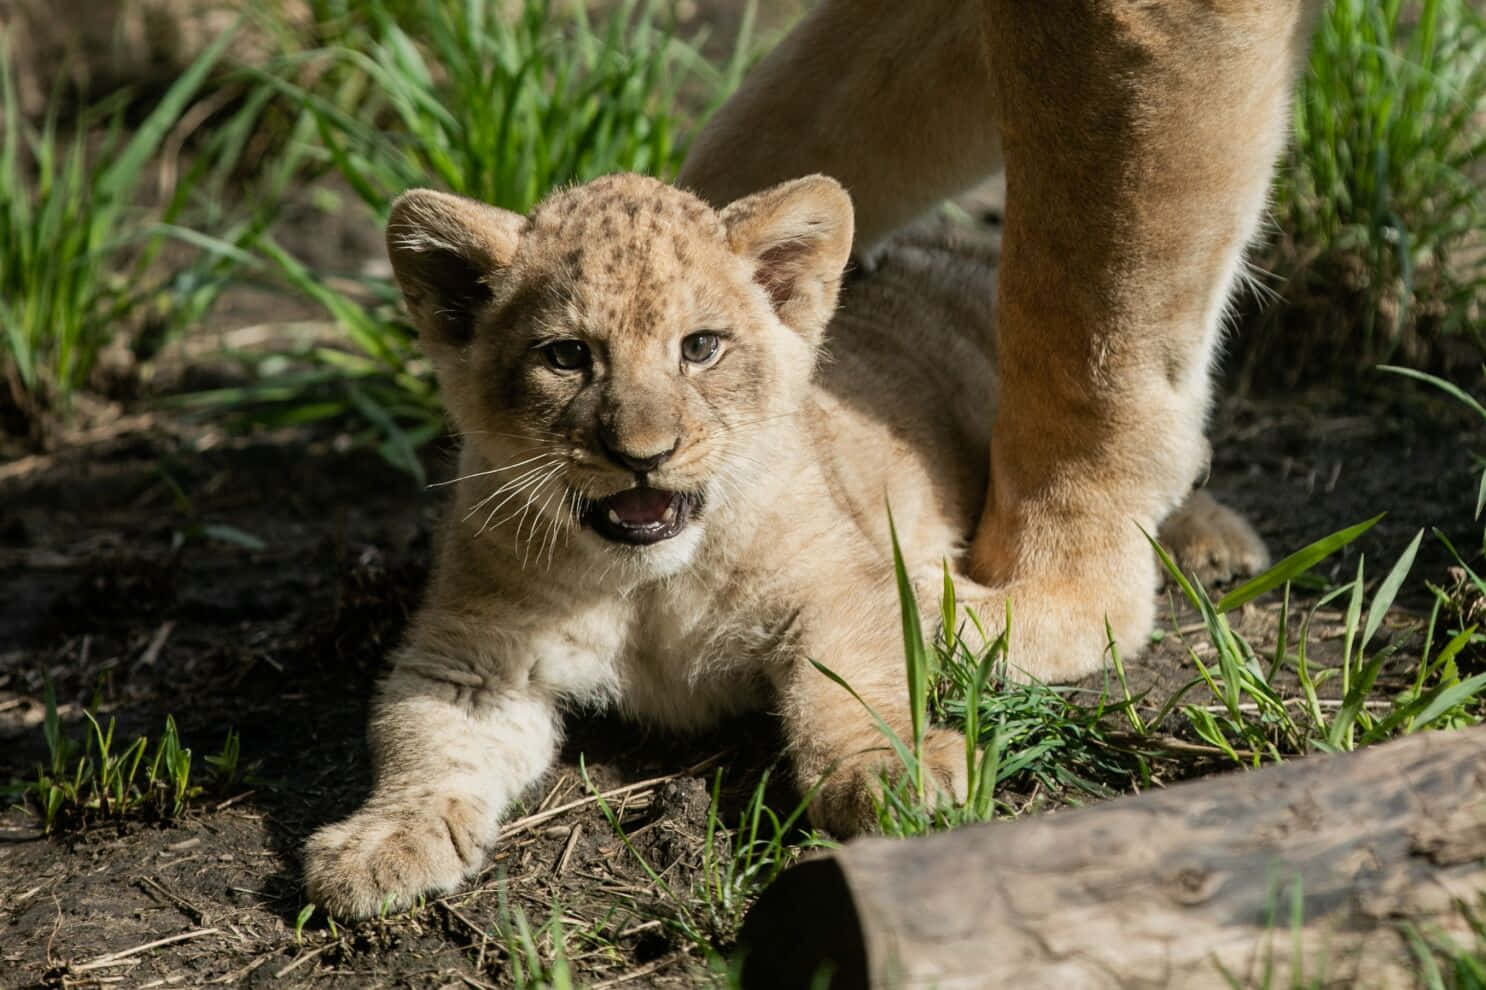 A baby lion cub looking curious